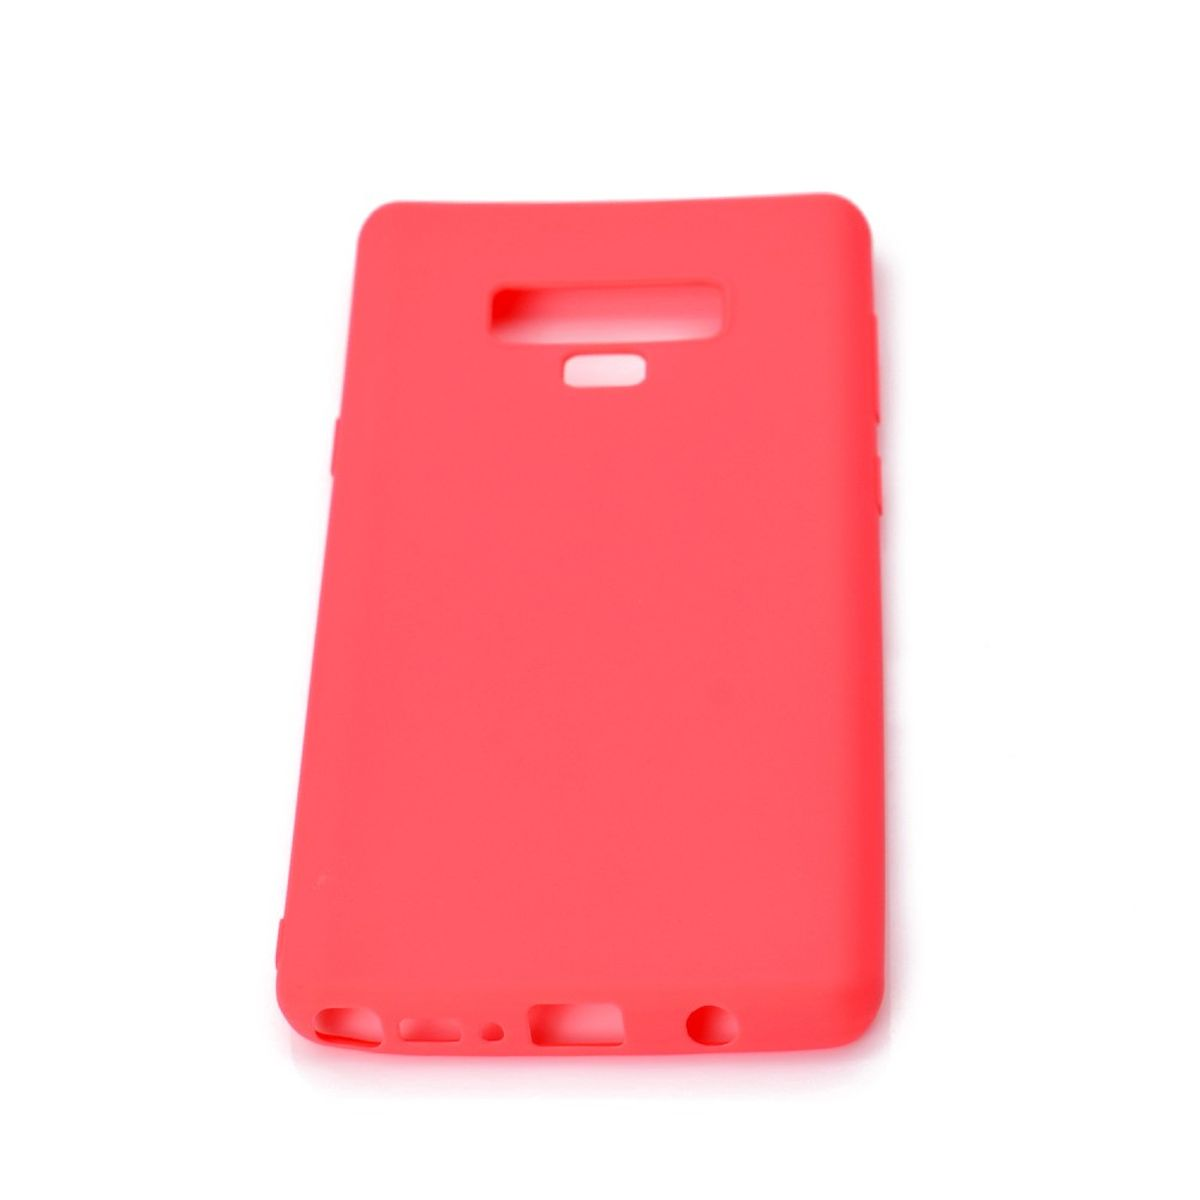 Handycase Note aus Backcover, 9, COVERKINGZ Galaxy Rot Samsung, Silikon,